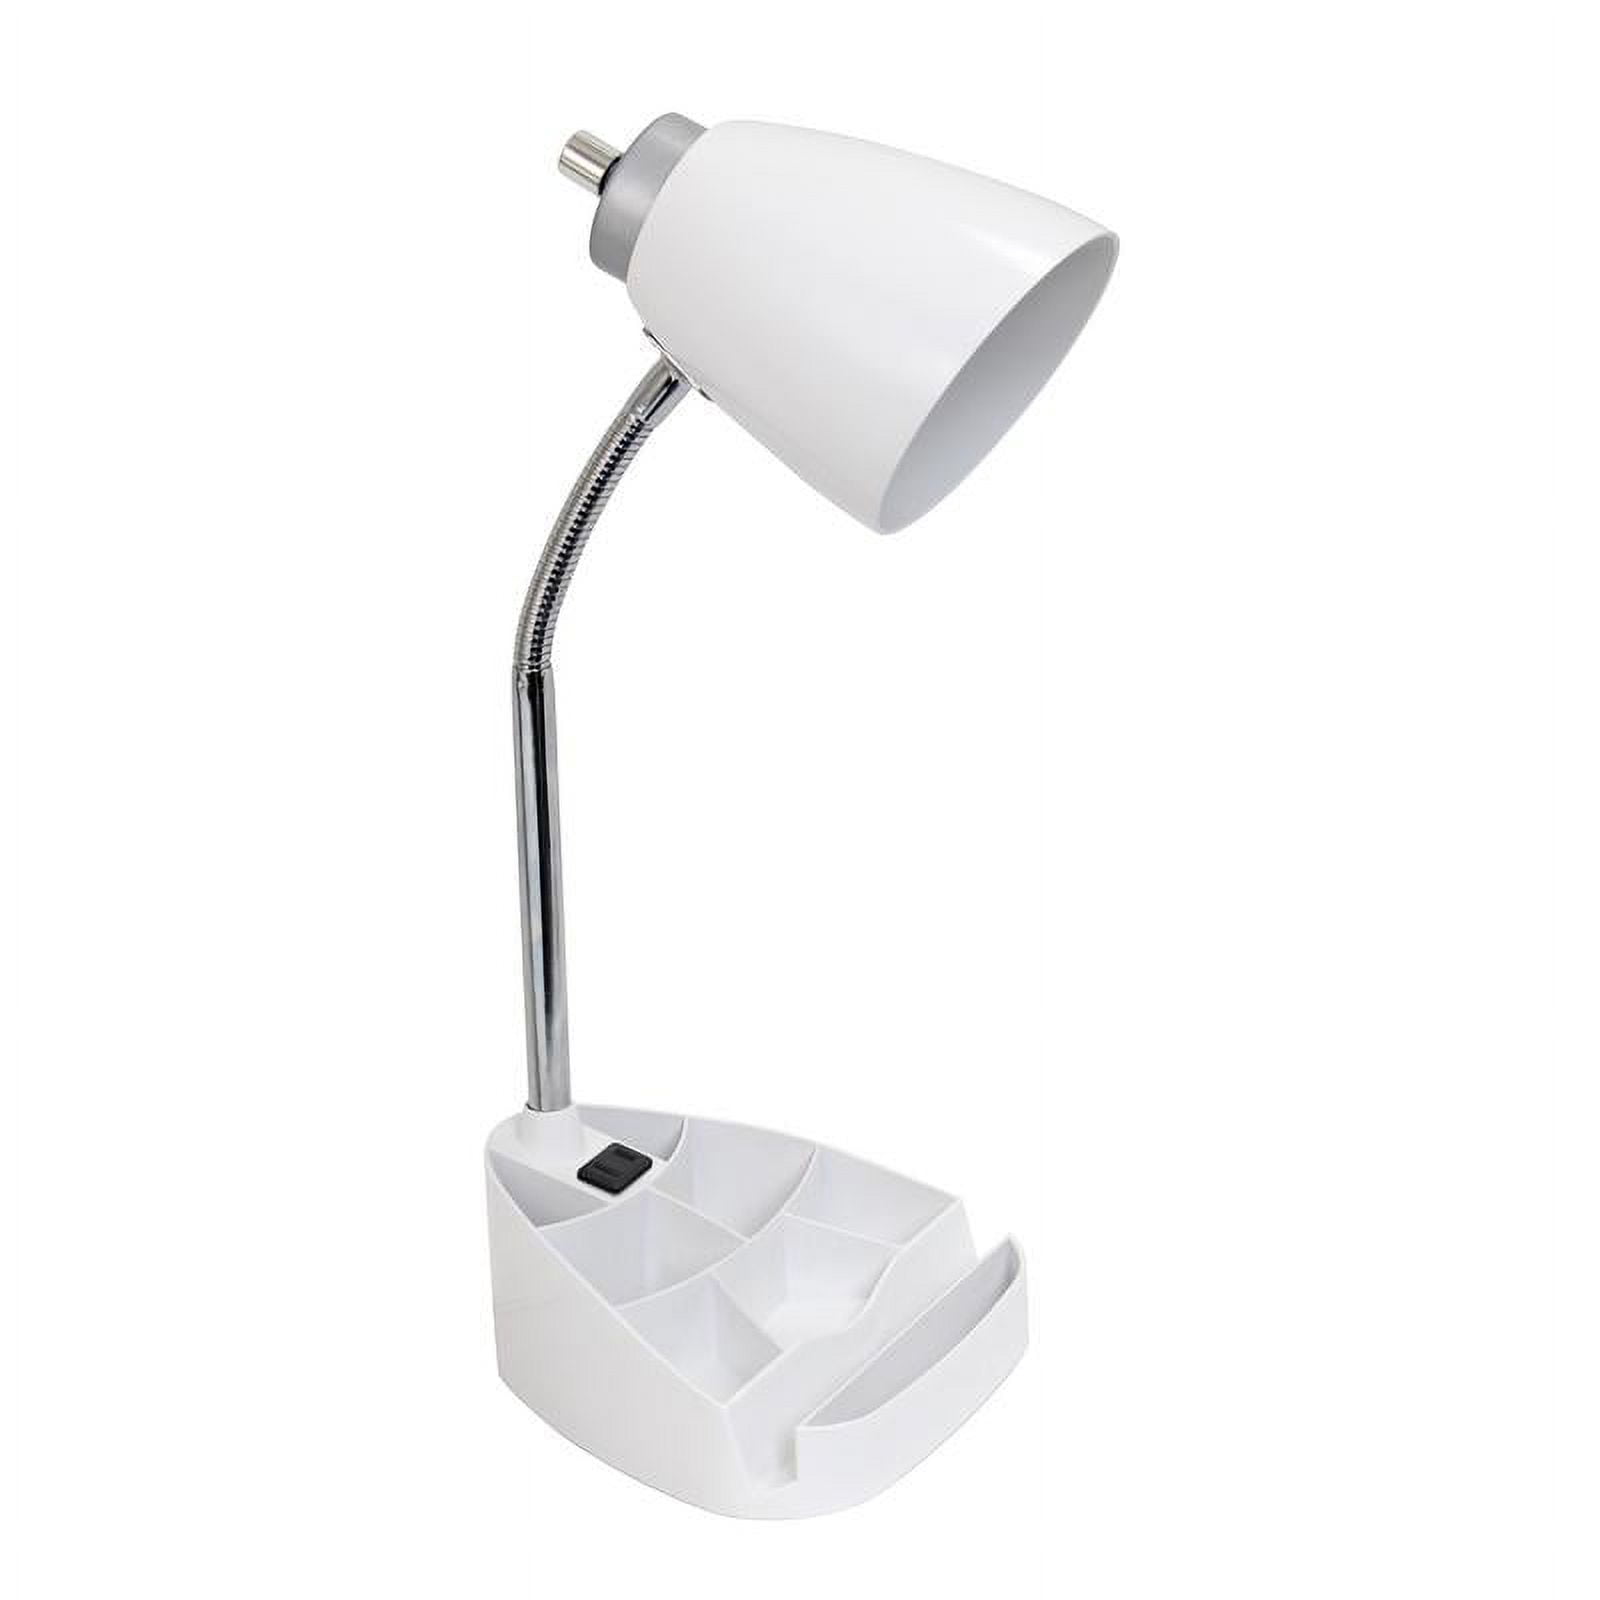 Gooseneck Organizer Desk Lamp With Ipad Tablet Stand Book Holder & Charging Outlet, White